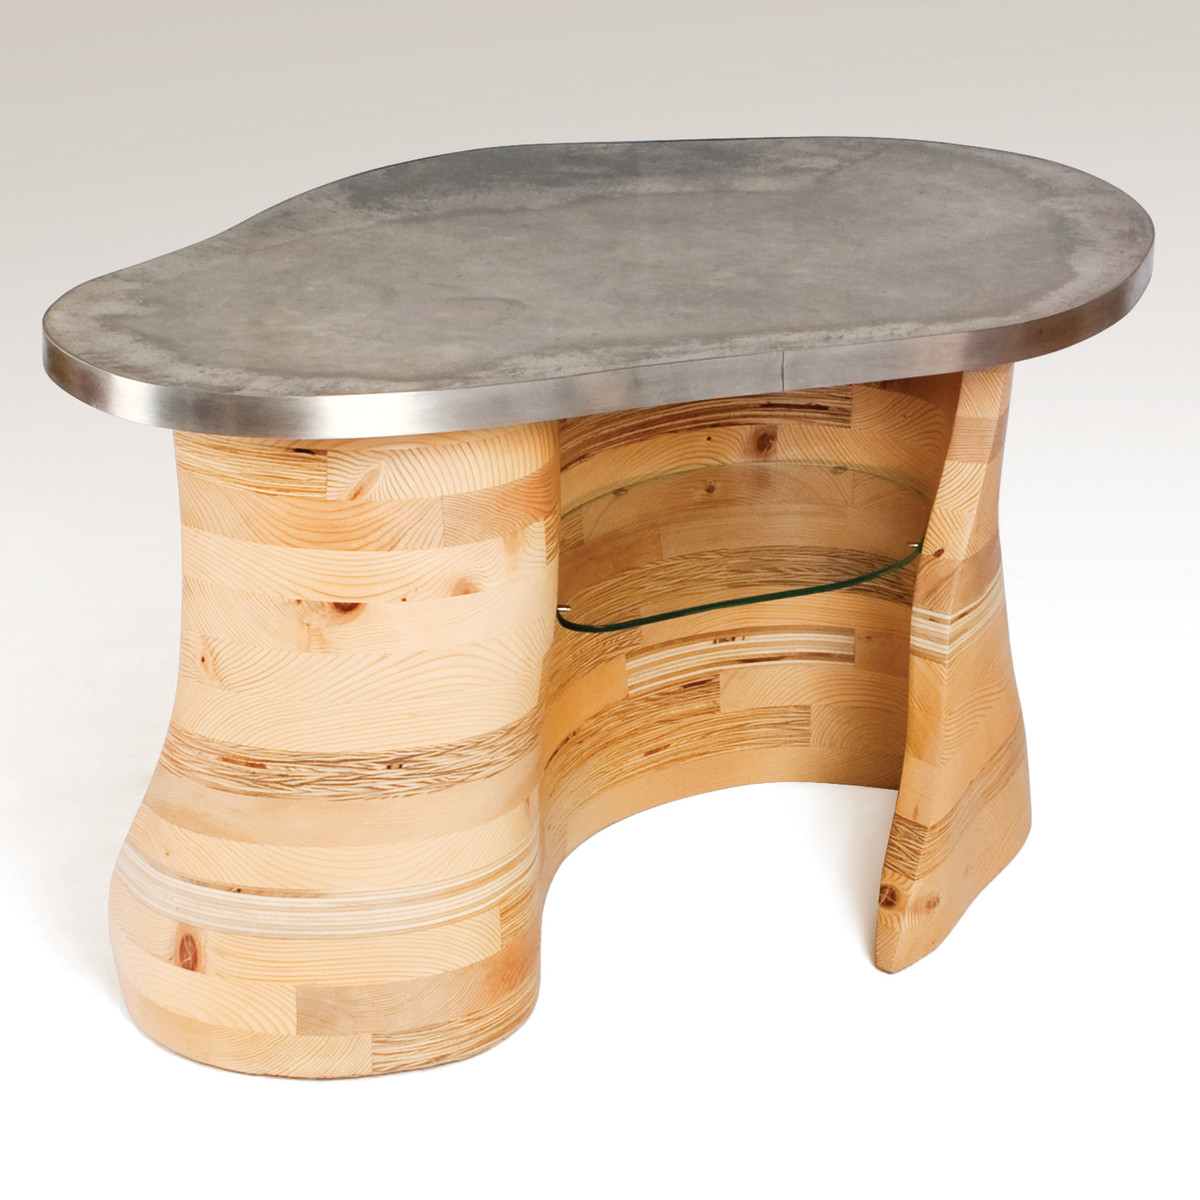 Contours table, 2011 Reclaimed construction lumber, concrete and stainless steel, 21"H, 39"W, 26"D by aaron d laux 